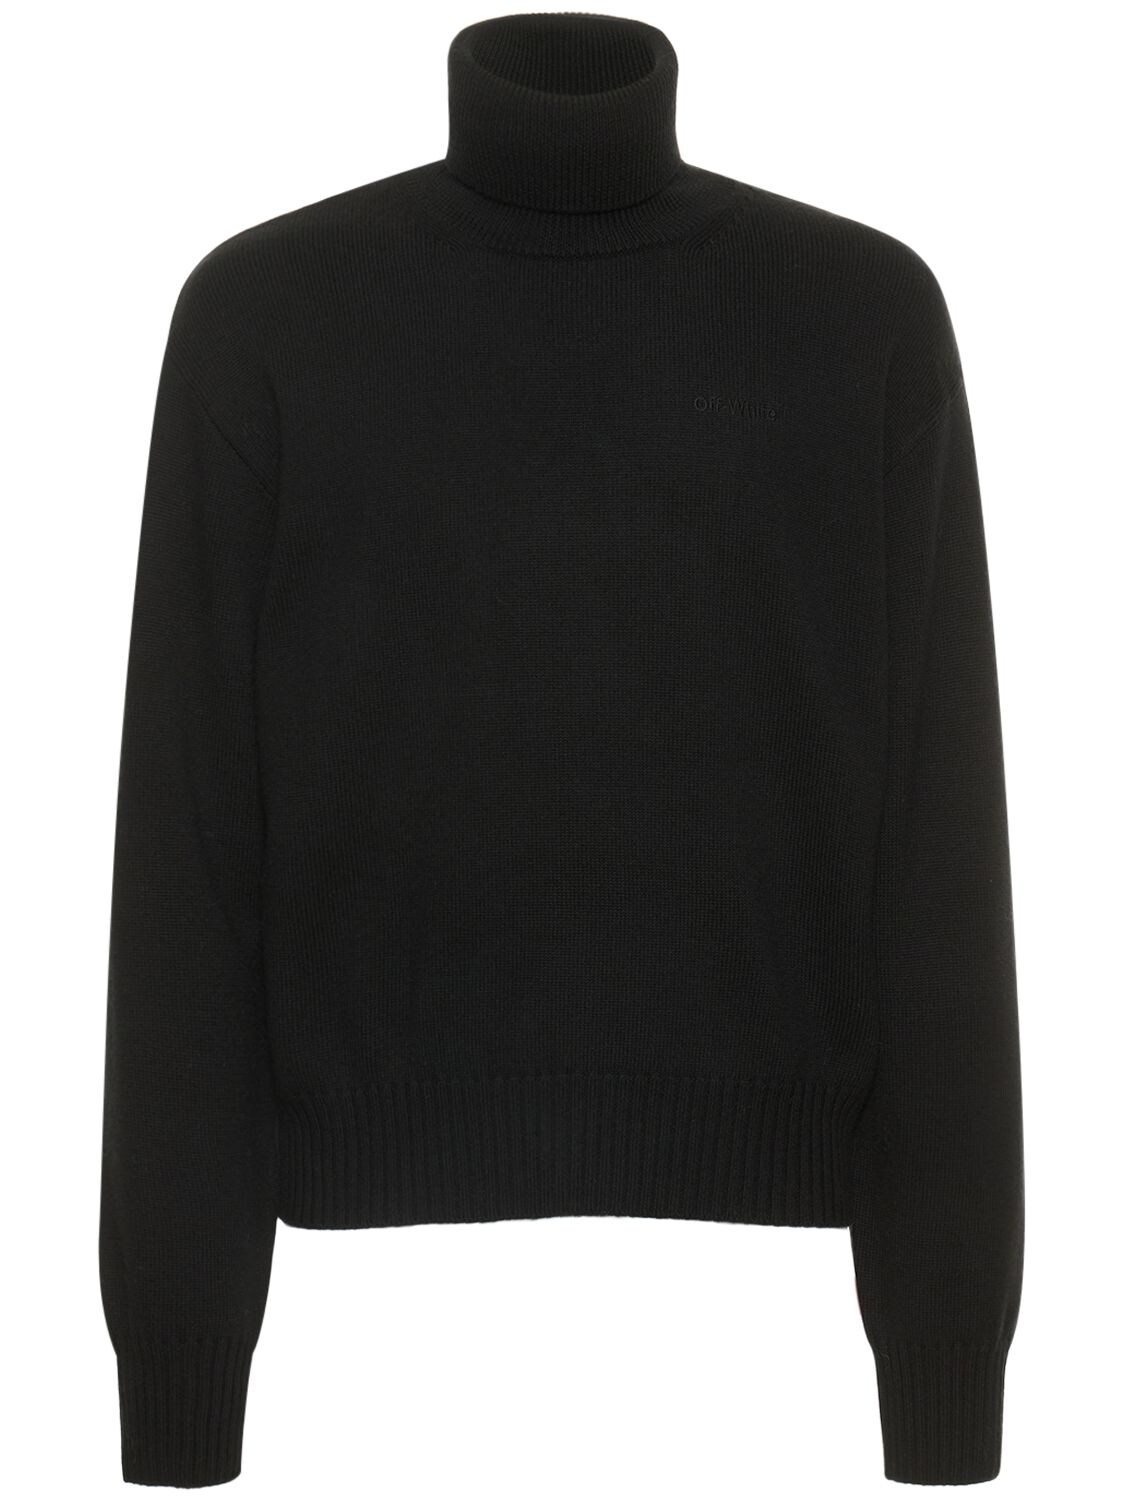 For All Wool Knit Turtleneck